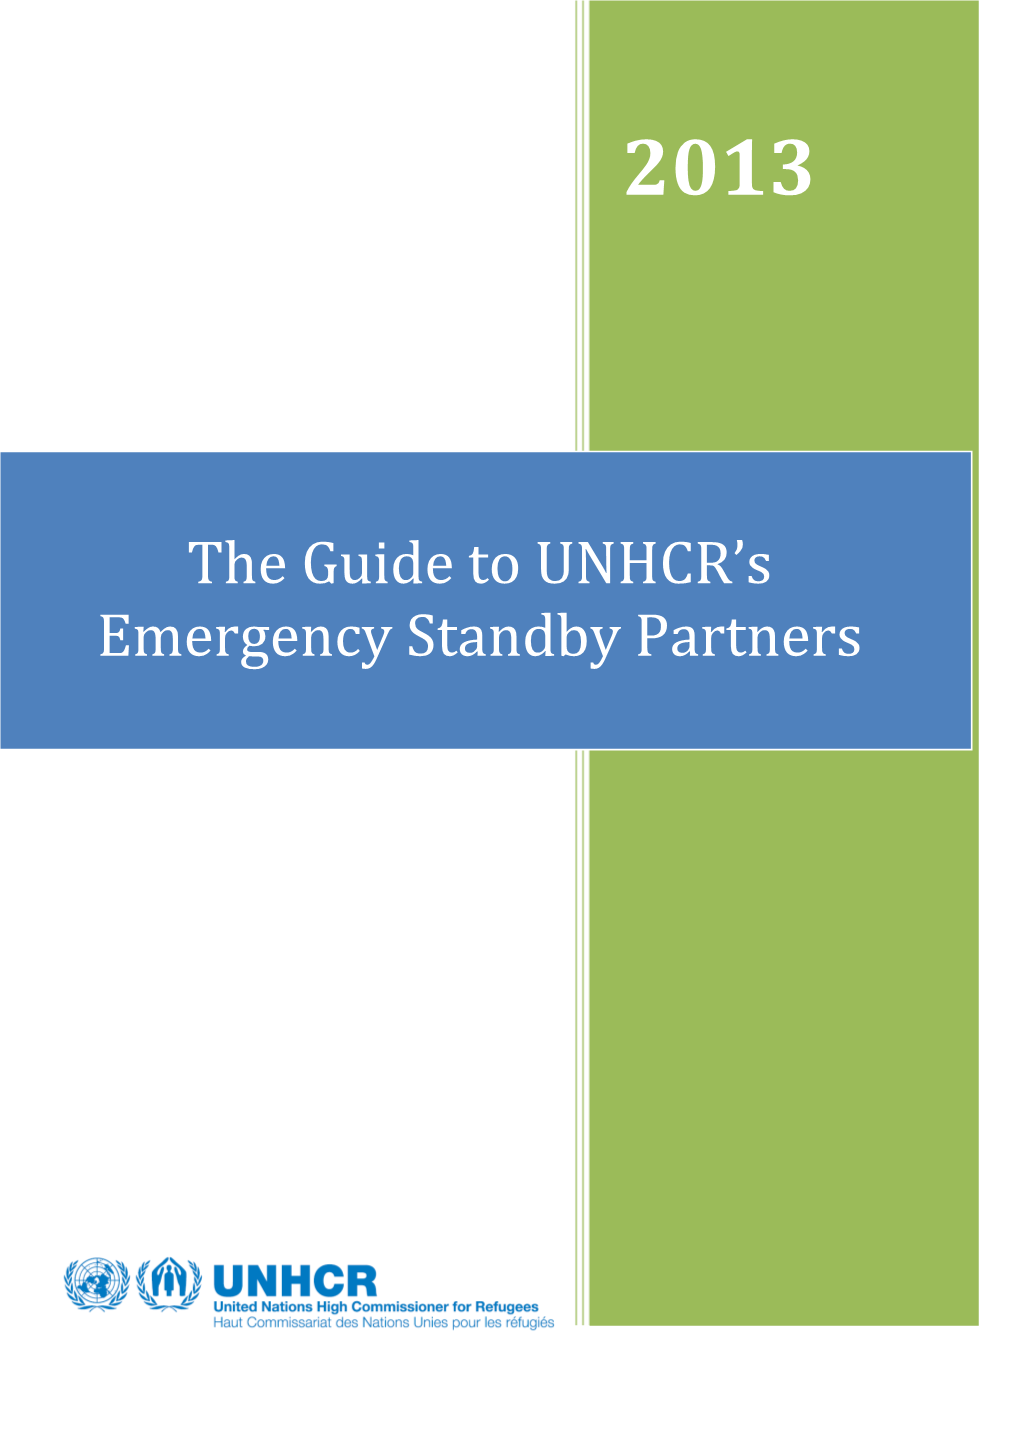 The Guide to UNHCR's Emergency Standby Partners